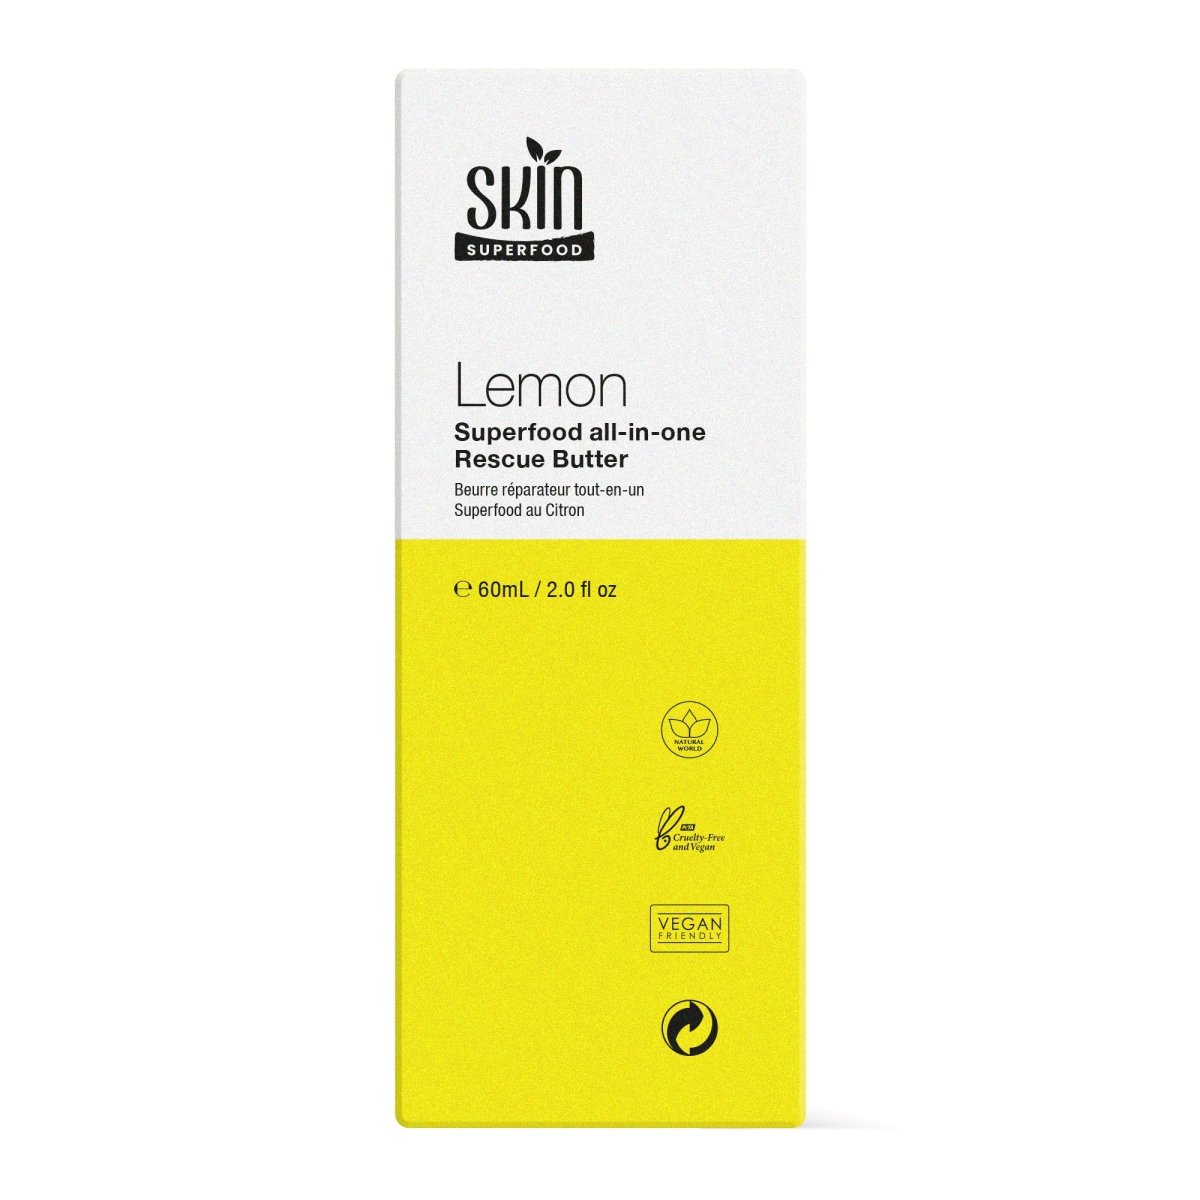 SF Lemon Superfood Rescue butter 60ml - skinChemists